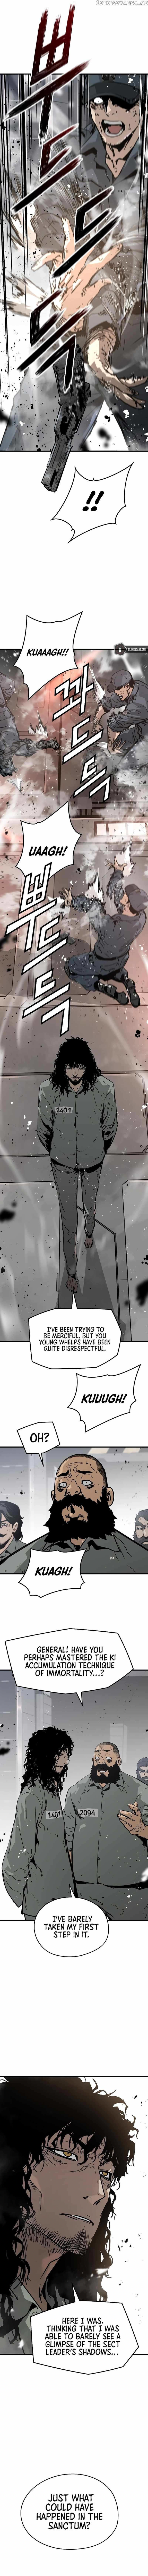 The Breaker: Eternal Force Chapter 64 page 10 - 